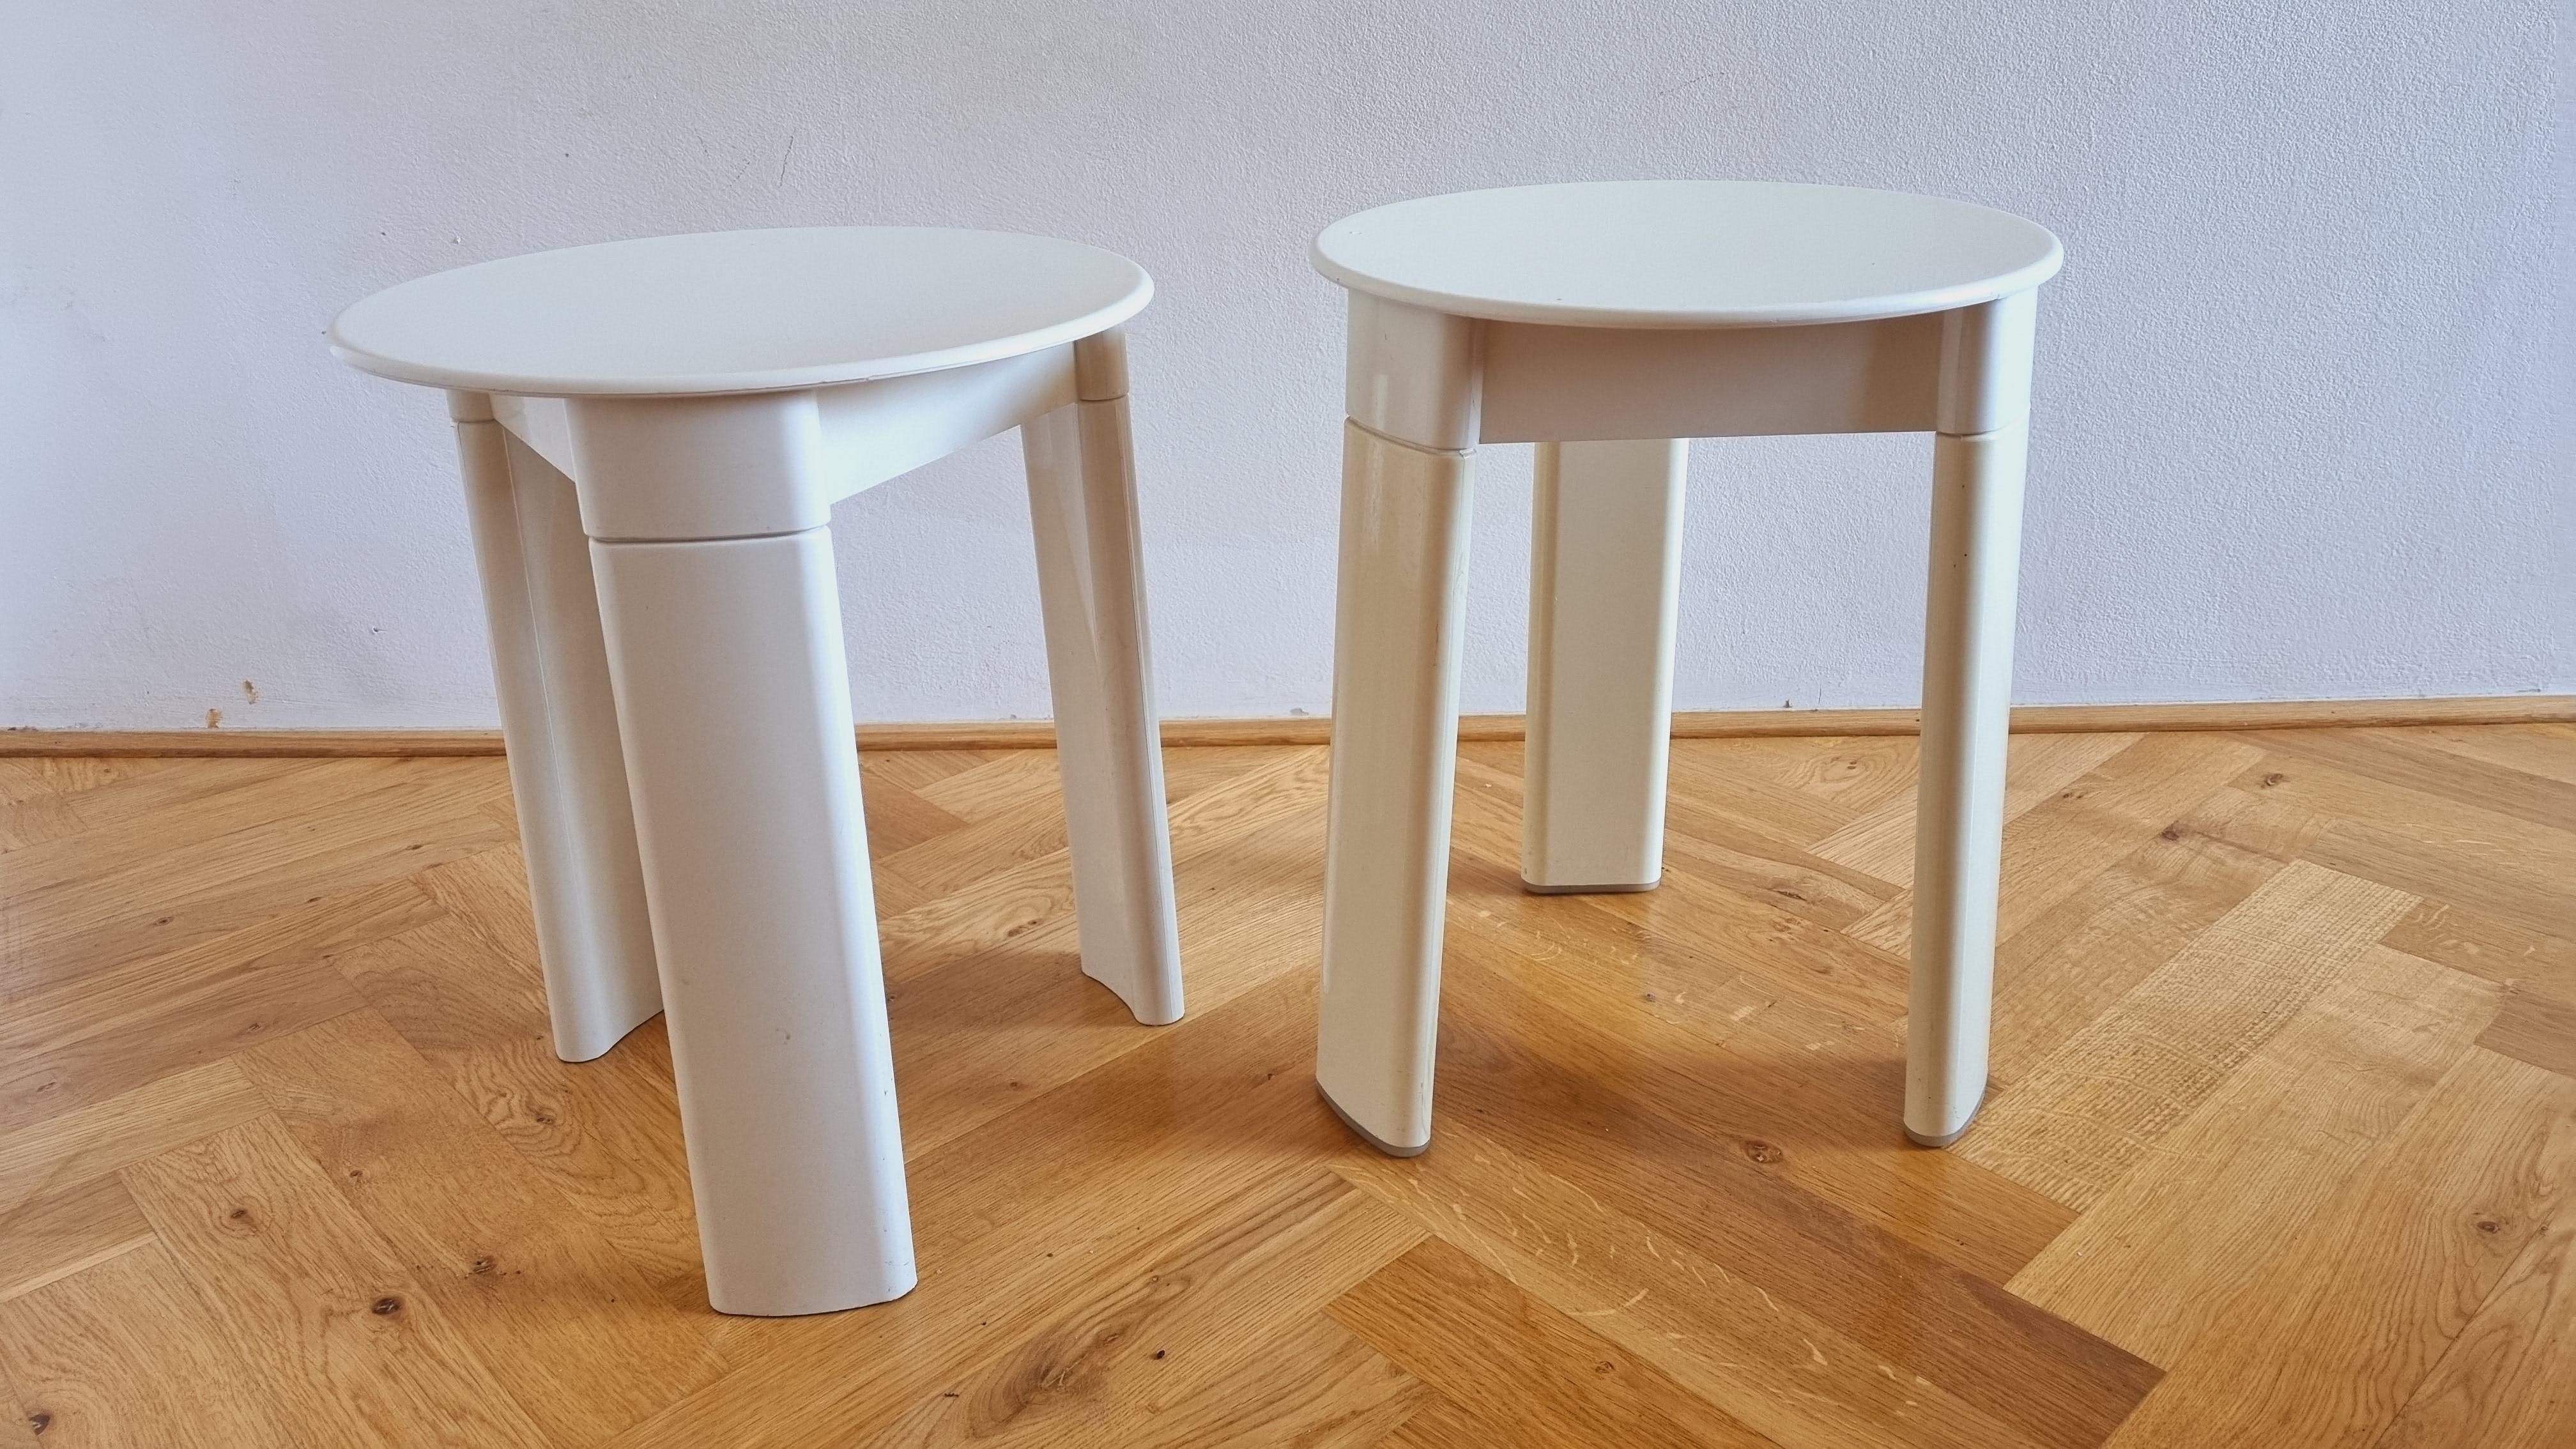 Pair of Midcentury Stools or Side Tables Trio, Olaf Von Bohr, Gedy, Italy, 1970s In Good Condition For Sale In Praha, CZ